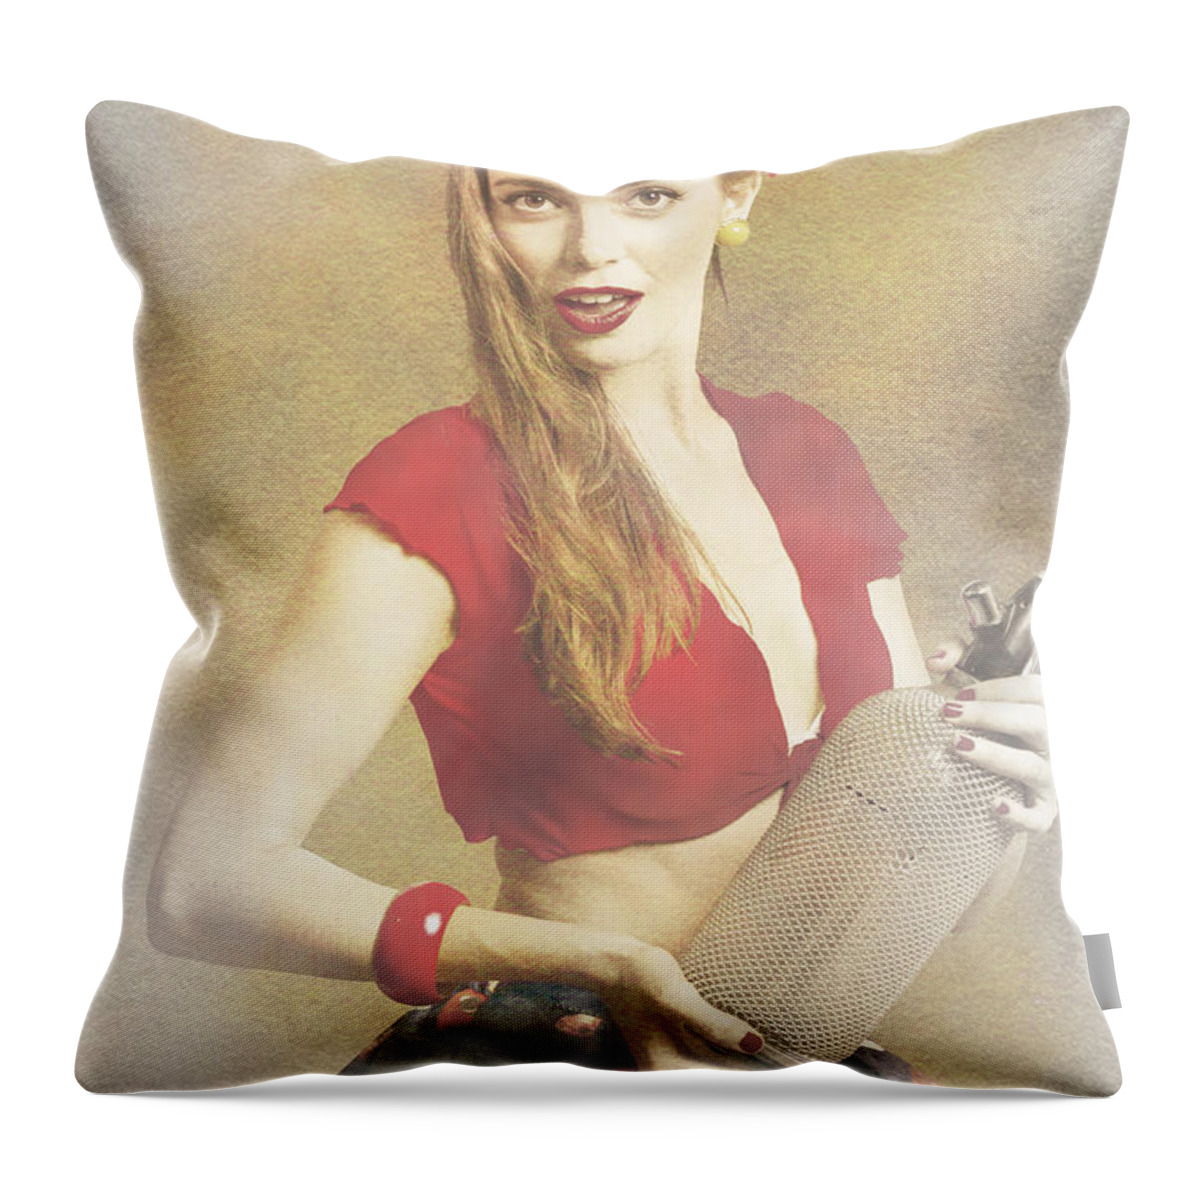 Advertising Throw Pillow featuring the photograph Vintage perfume advertisement circa 2015 by Jorgo Photography